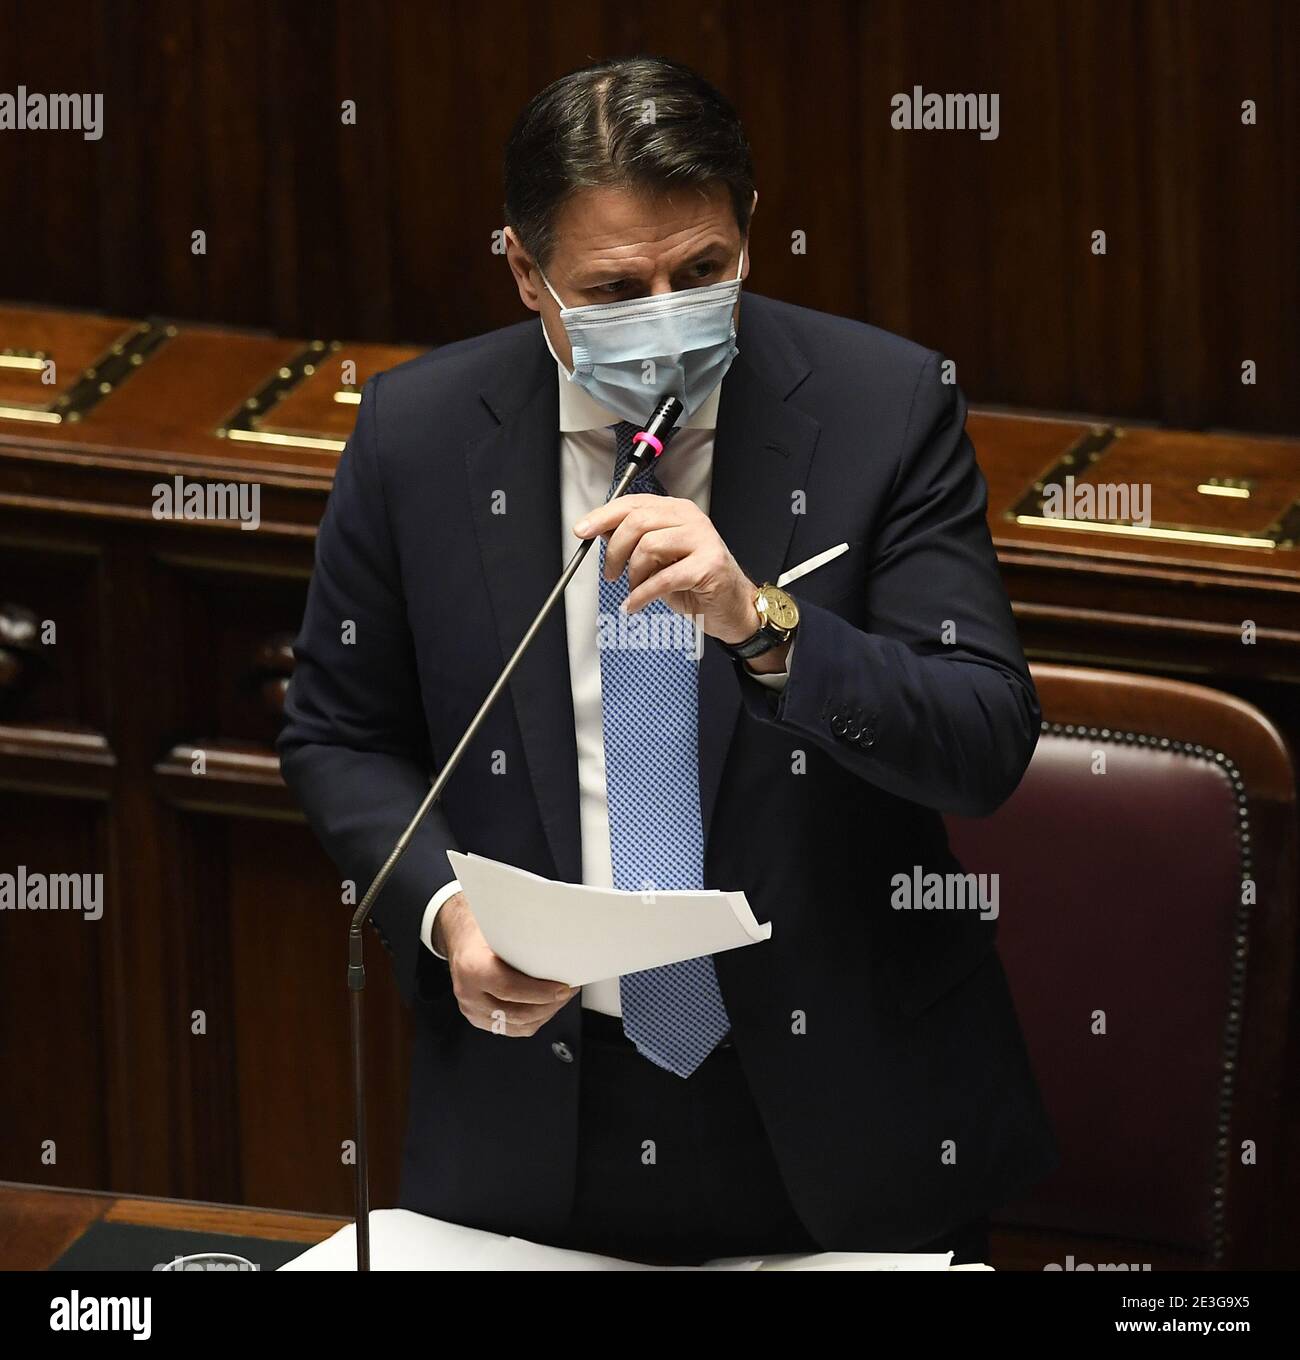 Rome. 19th Jan, 2021. Italian Prime Minister Giuseppe Conte addresses the lower house of Parliament in Rome, Italy, on Jan. 18, 2021. Italian Prime Minister Giuseppe Conte won a confidence vote at the Lower House of Parliament on Monday by 321 in favor, 259 against and 27 abstaining. Conte sought the confidence vote after former Prime Minister Matteo Renzi, now a senator who leads the Italia Viva party, pulled out of the ruling majority last week, sparking a government crisis. Credit: Xinhua/Alamy Live News Stock Photo